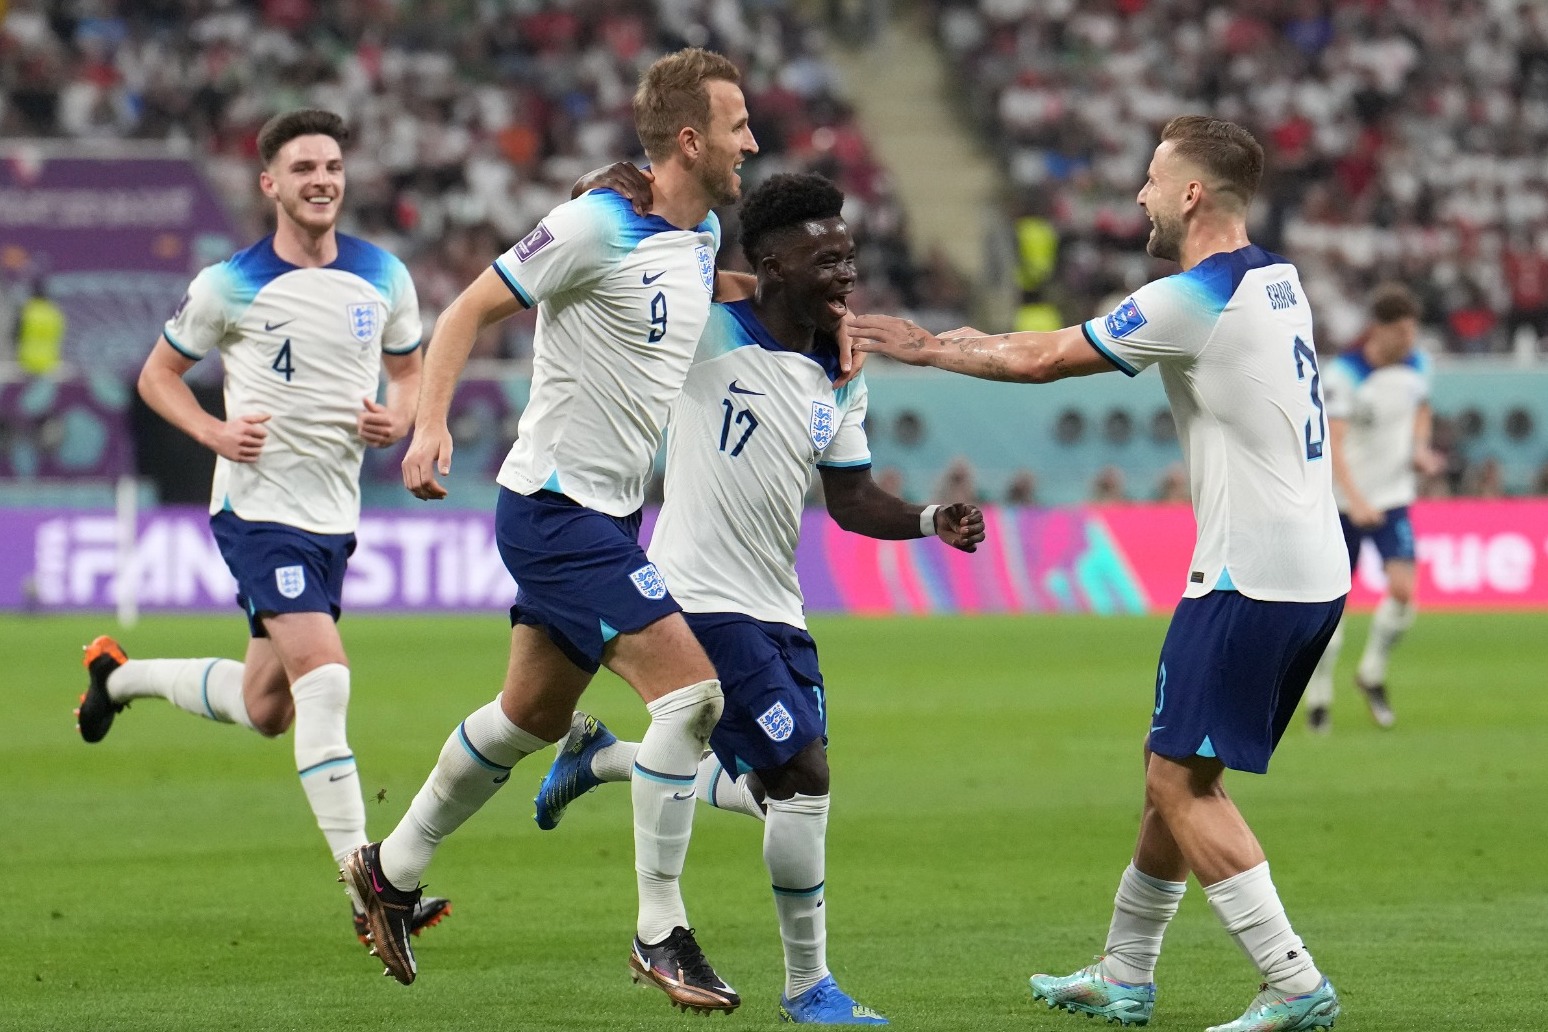 ENGLAND'S QUEST FOR GLORY AT THE FIFA WORLD CUP BEGINS…